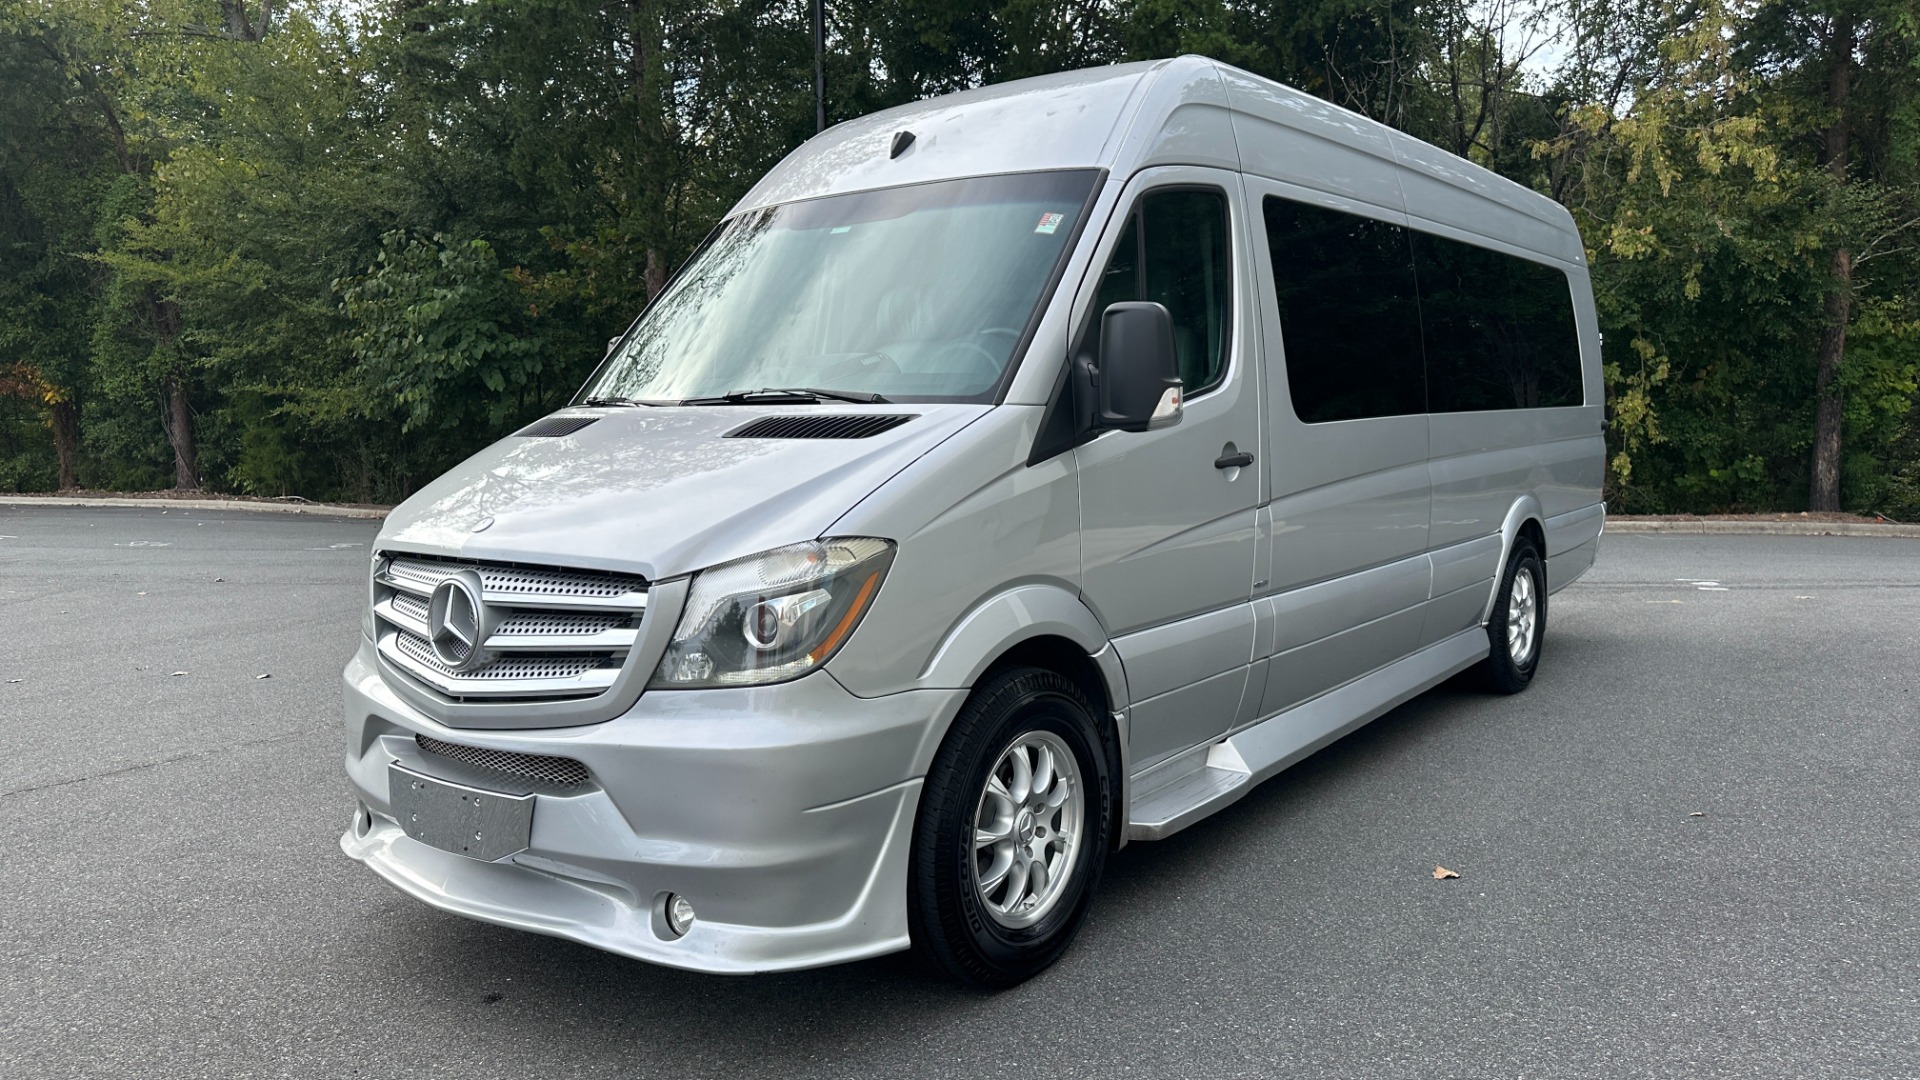 Used 2015 Mercedes-Benz Sprinter Cargo Vans EXT / MIDWEST AUTOMOTIVE DESIGN / LUXURY SPRINTER / TV'S / WIFI / MORE!! for sale $69,999 at Formula Imports in Charlotte NC 28227 6